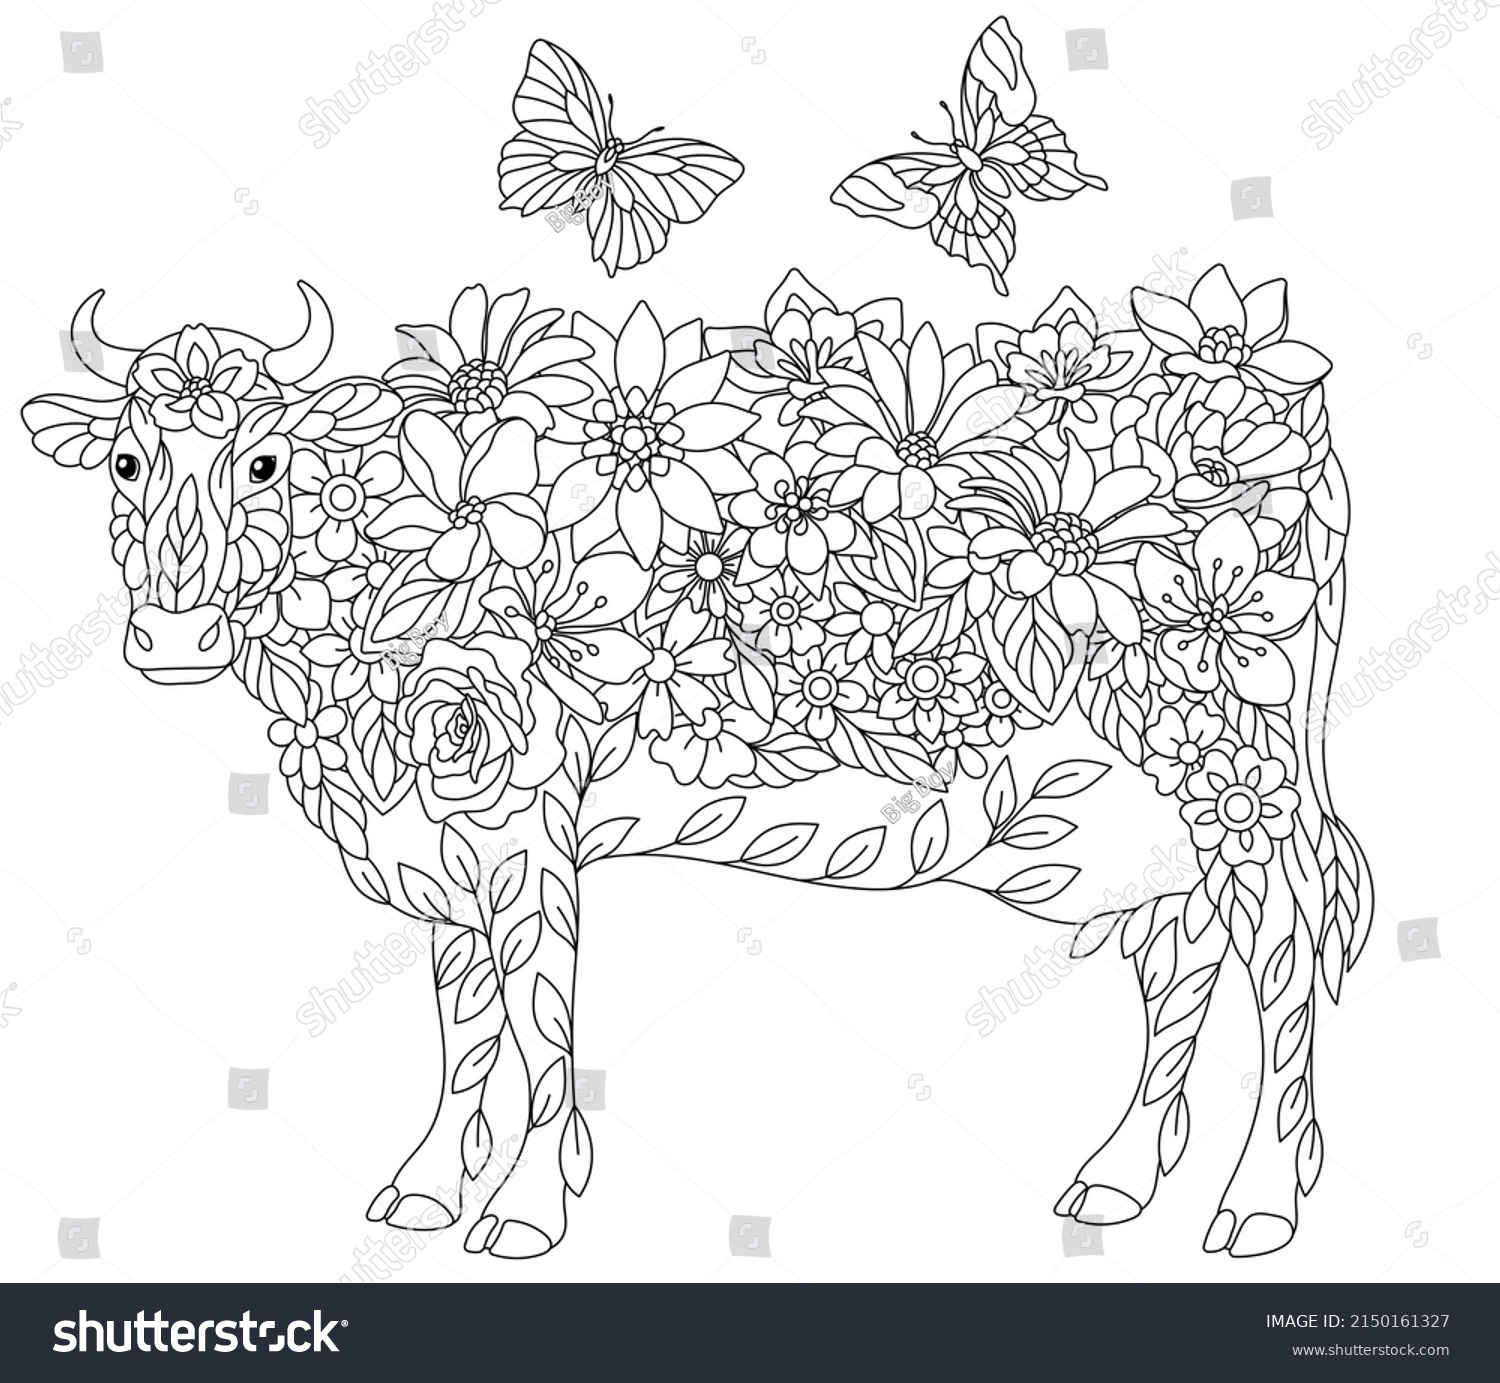 Adult coloring pages cows images stock photos d objects vectors